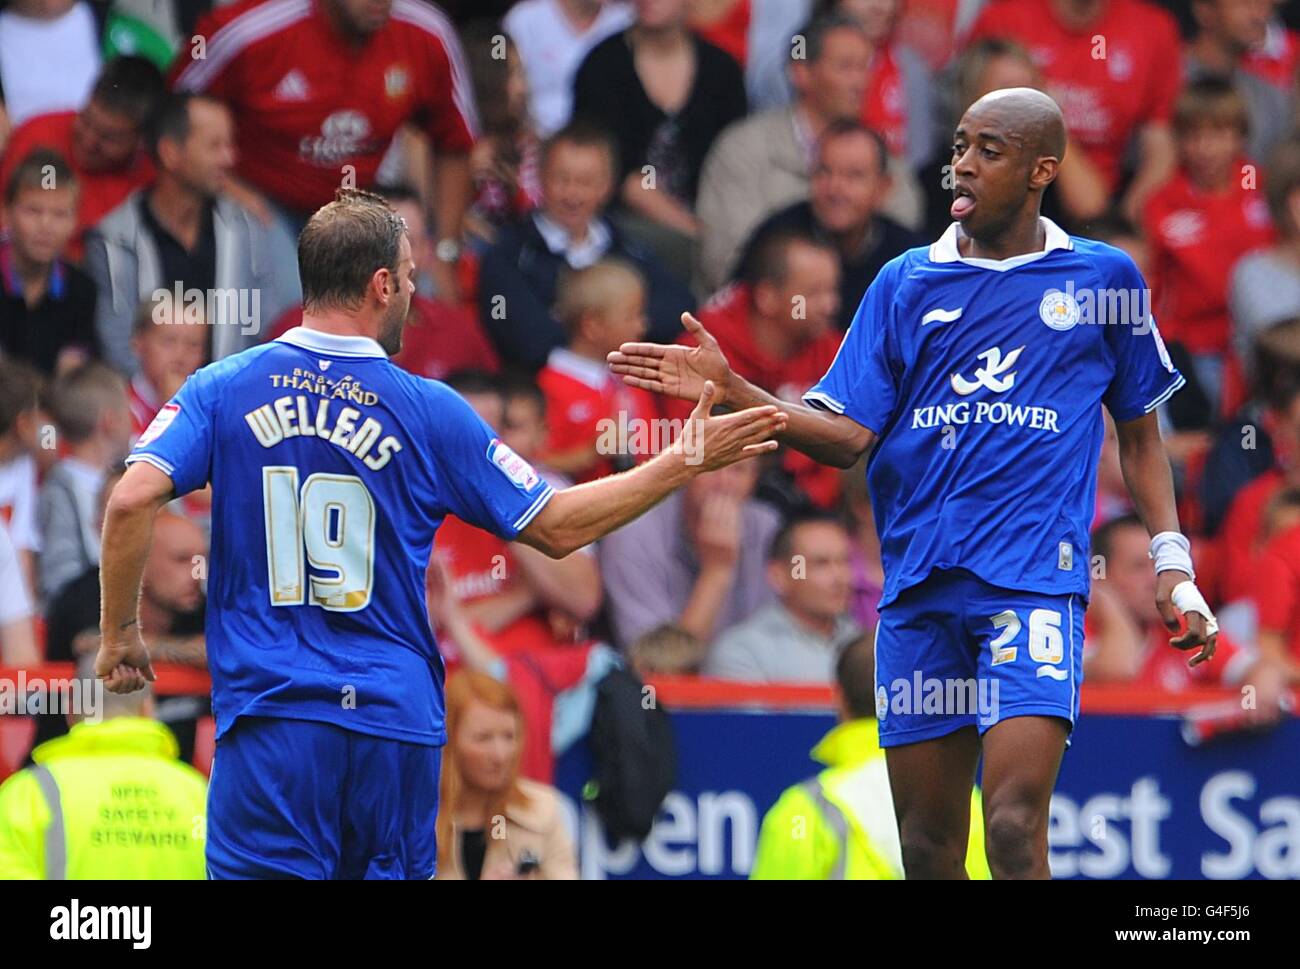 Soccer - npower Football League Championship - Nottingham Forest v Leicester City - City Ground. Leicester City's Gelson Fernandes (rigth) celebrates with team-mate Richard Wellens (left) after scoring the second goal of the game Stock Photo